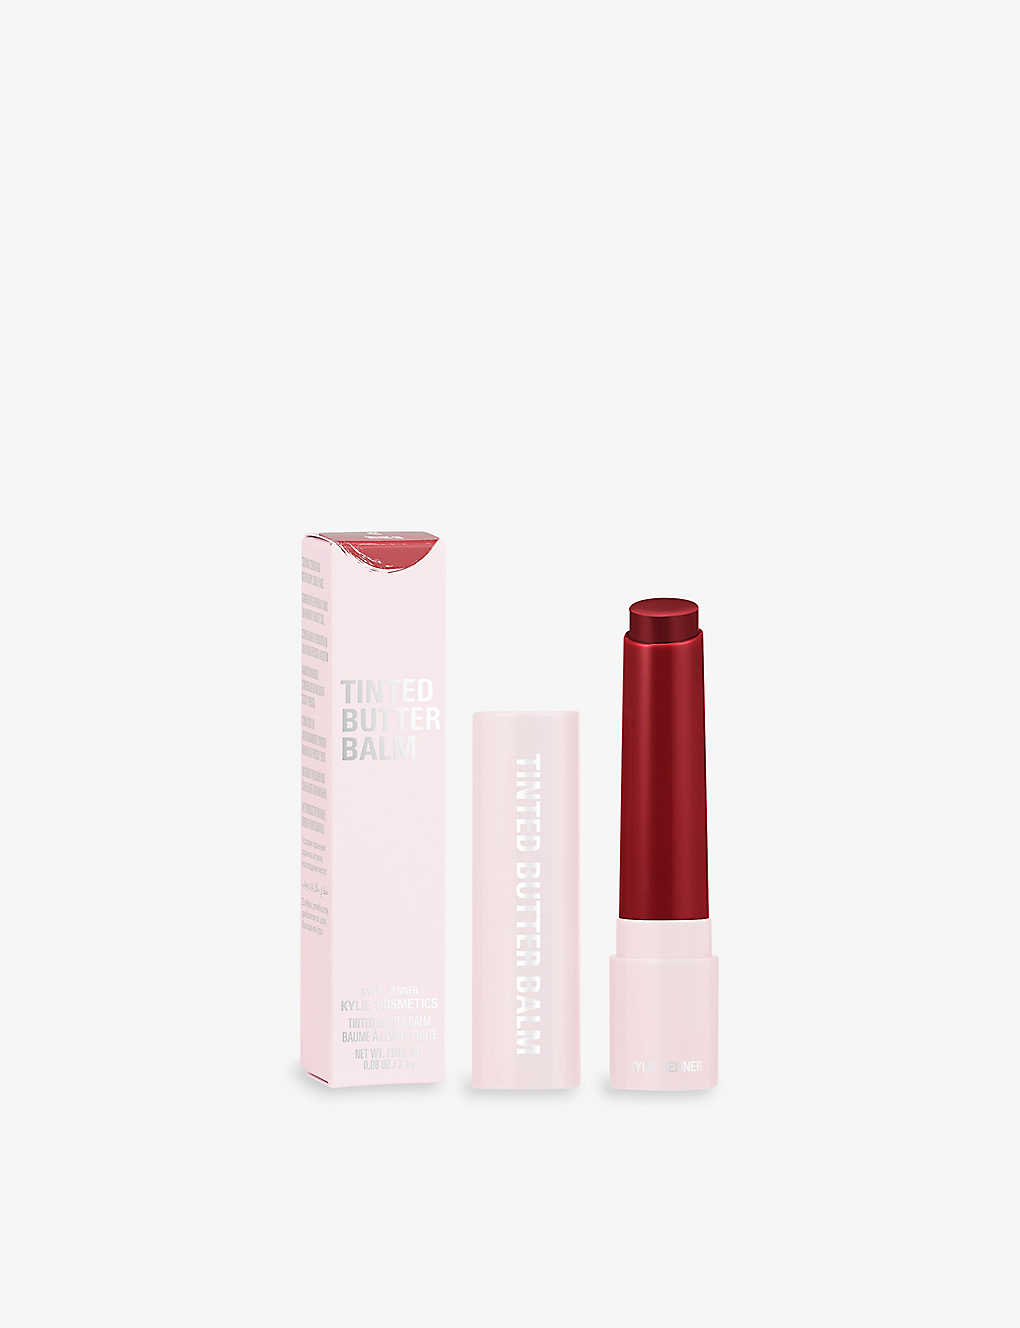 Kylie By Kylie Jenner Moving On Tinted Butter Balm 2.4g